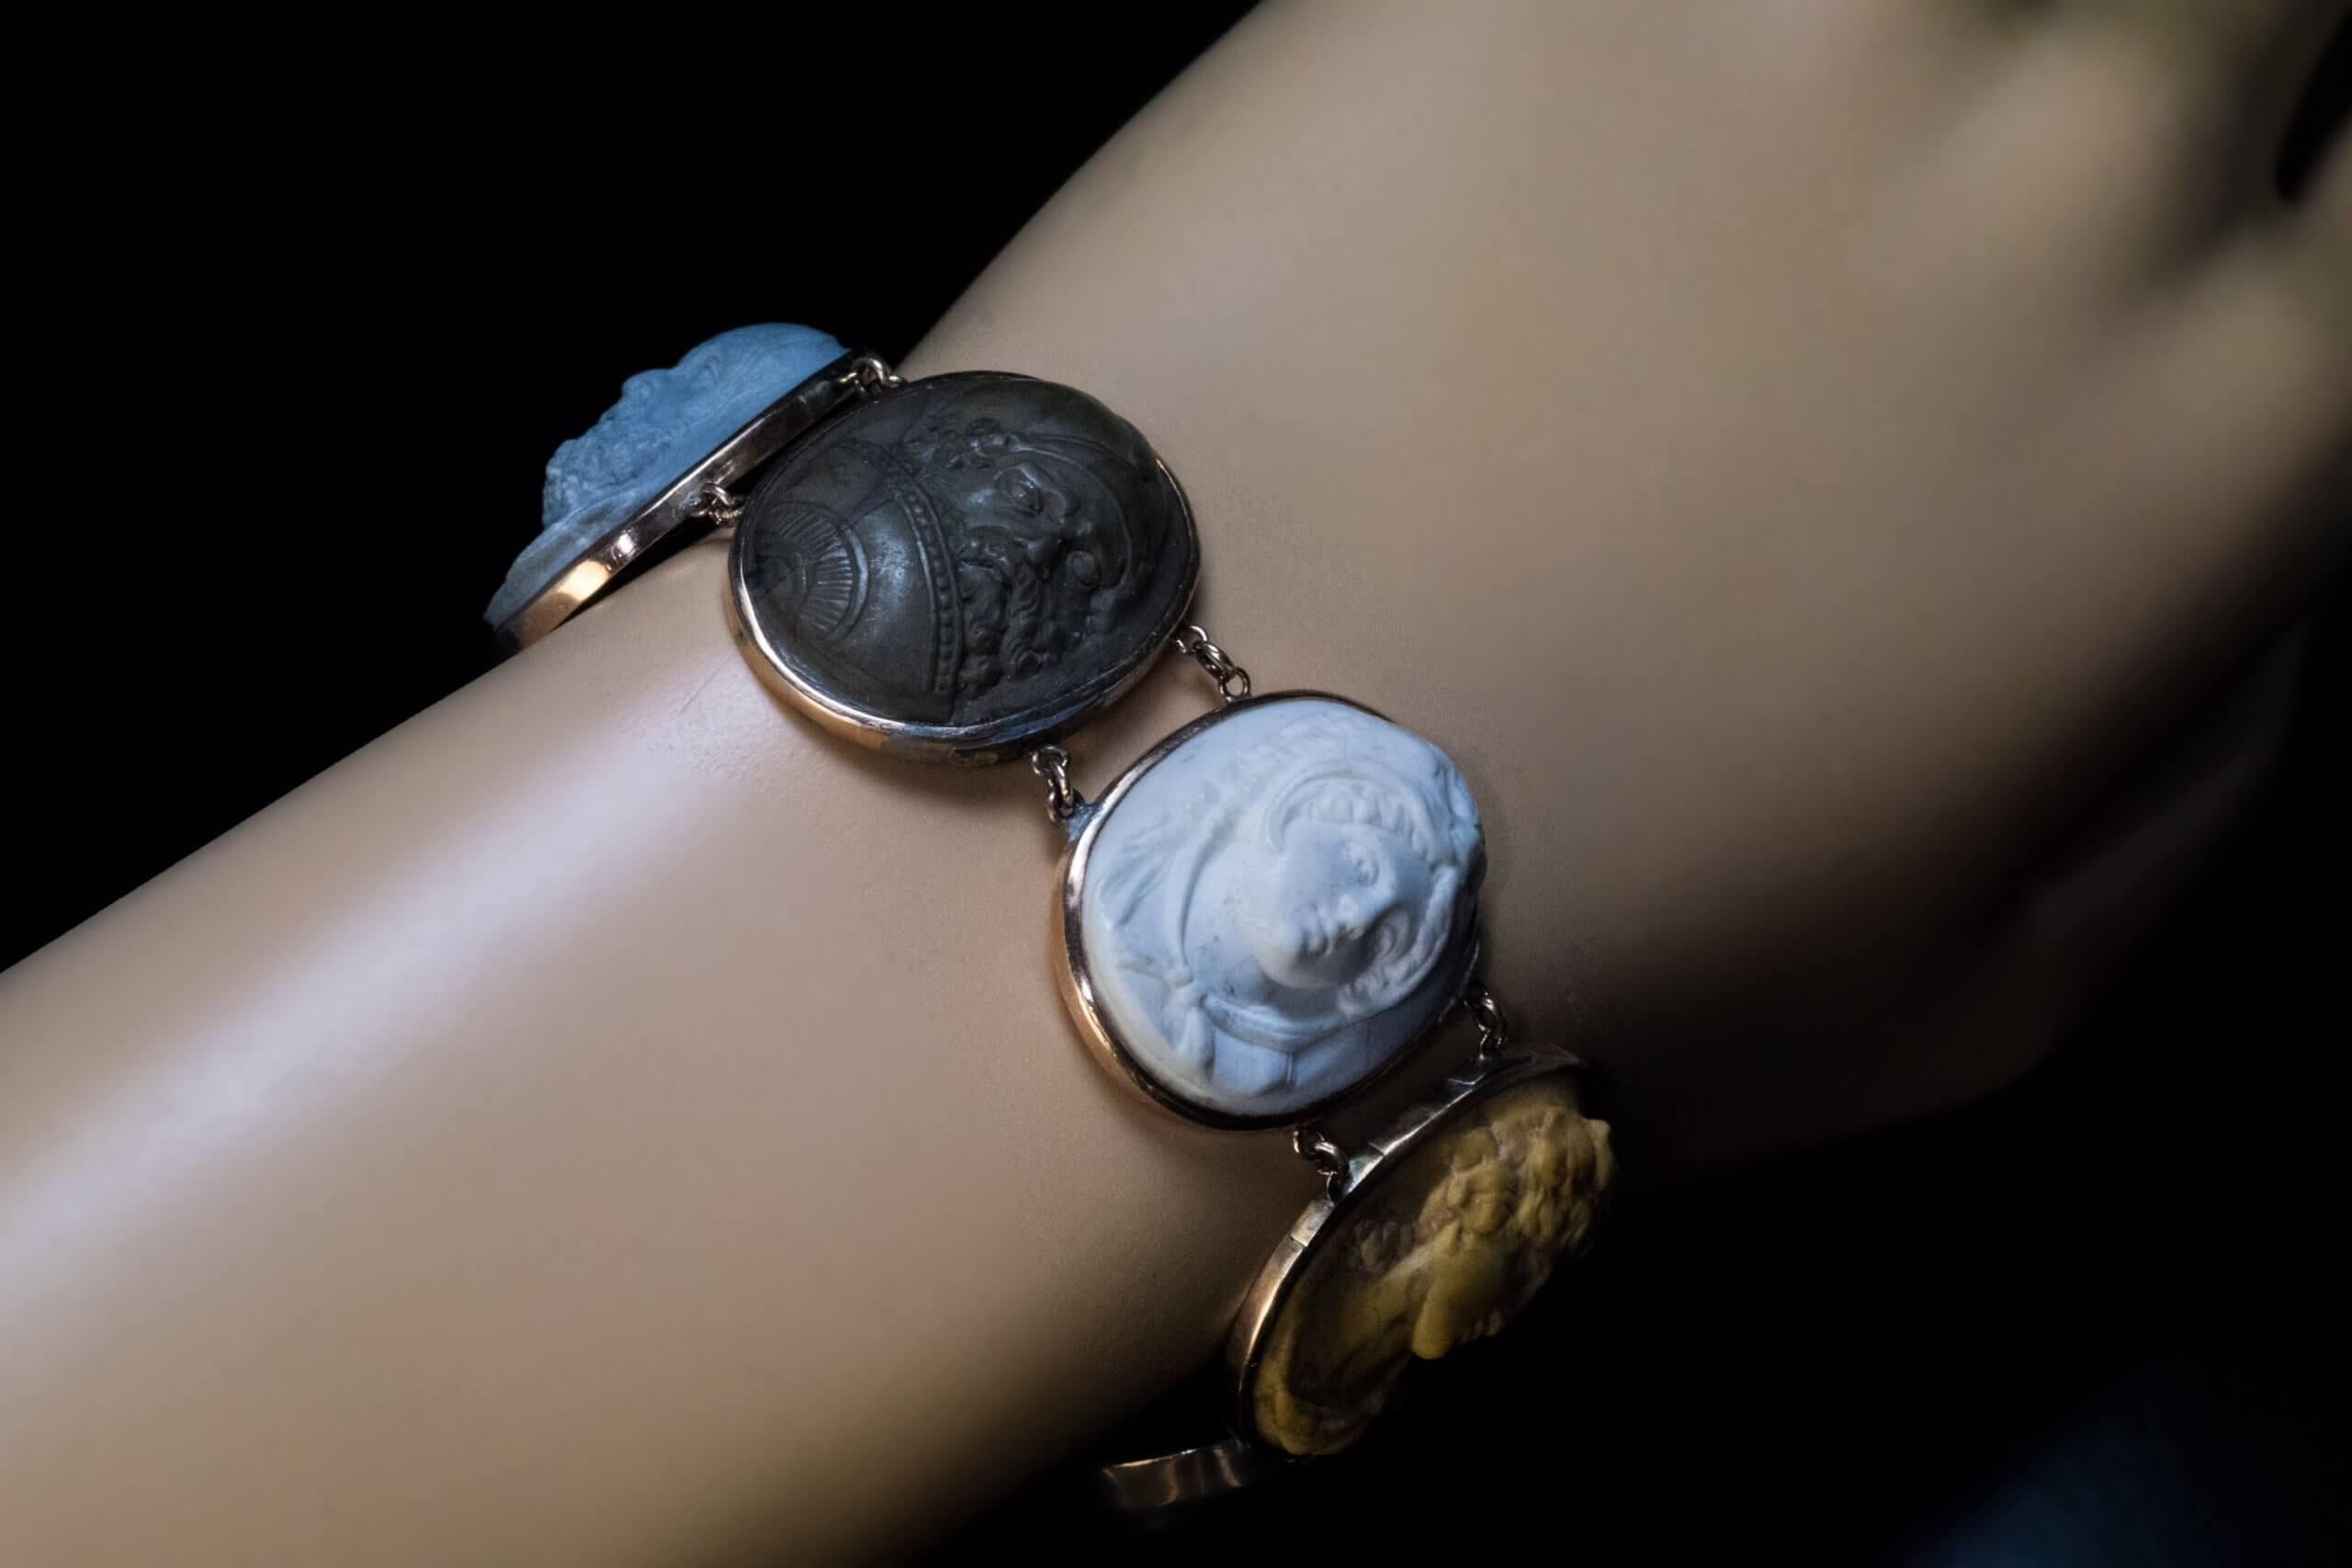 Italian, circa 1820  The rose gold bracelet is bezel-set with seven exquisitely carved in high relief cameos from Mount Vesuvius lavas. The cameos feature deities (Athens, Hercules, Dionysus) and famous philosophers and historical figures of the